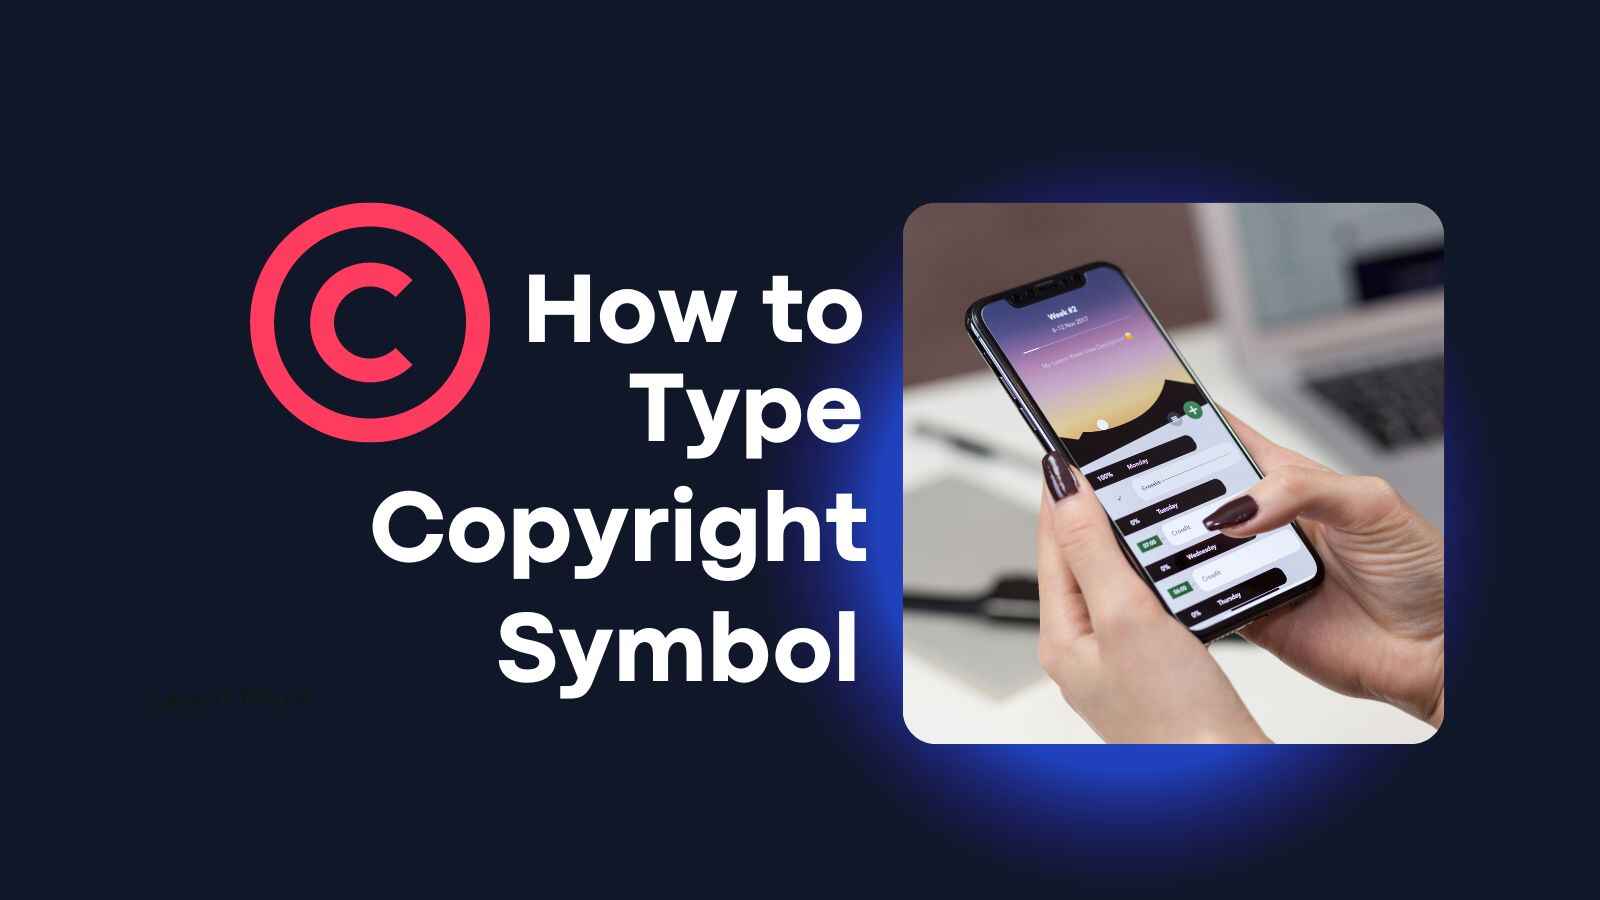 how to type copyright symbol on mac iphone android windows shortcut